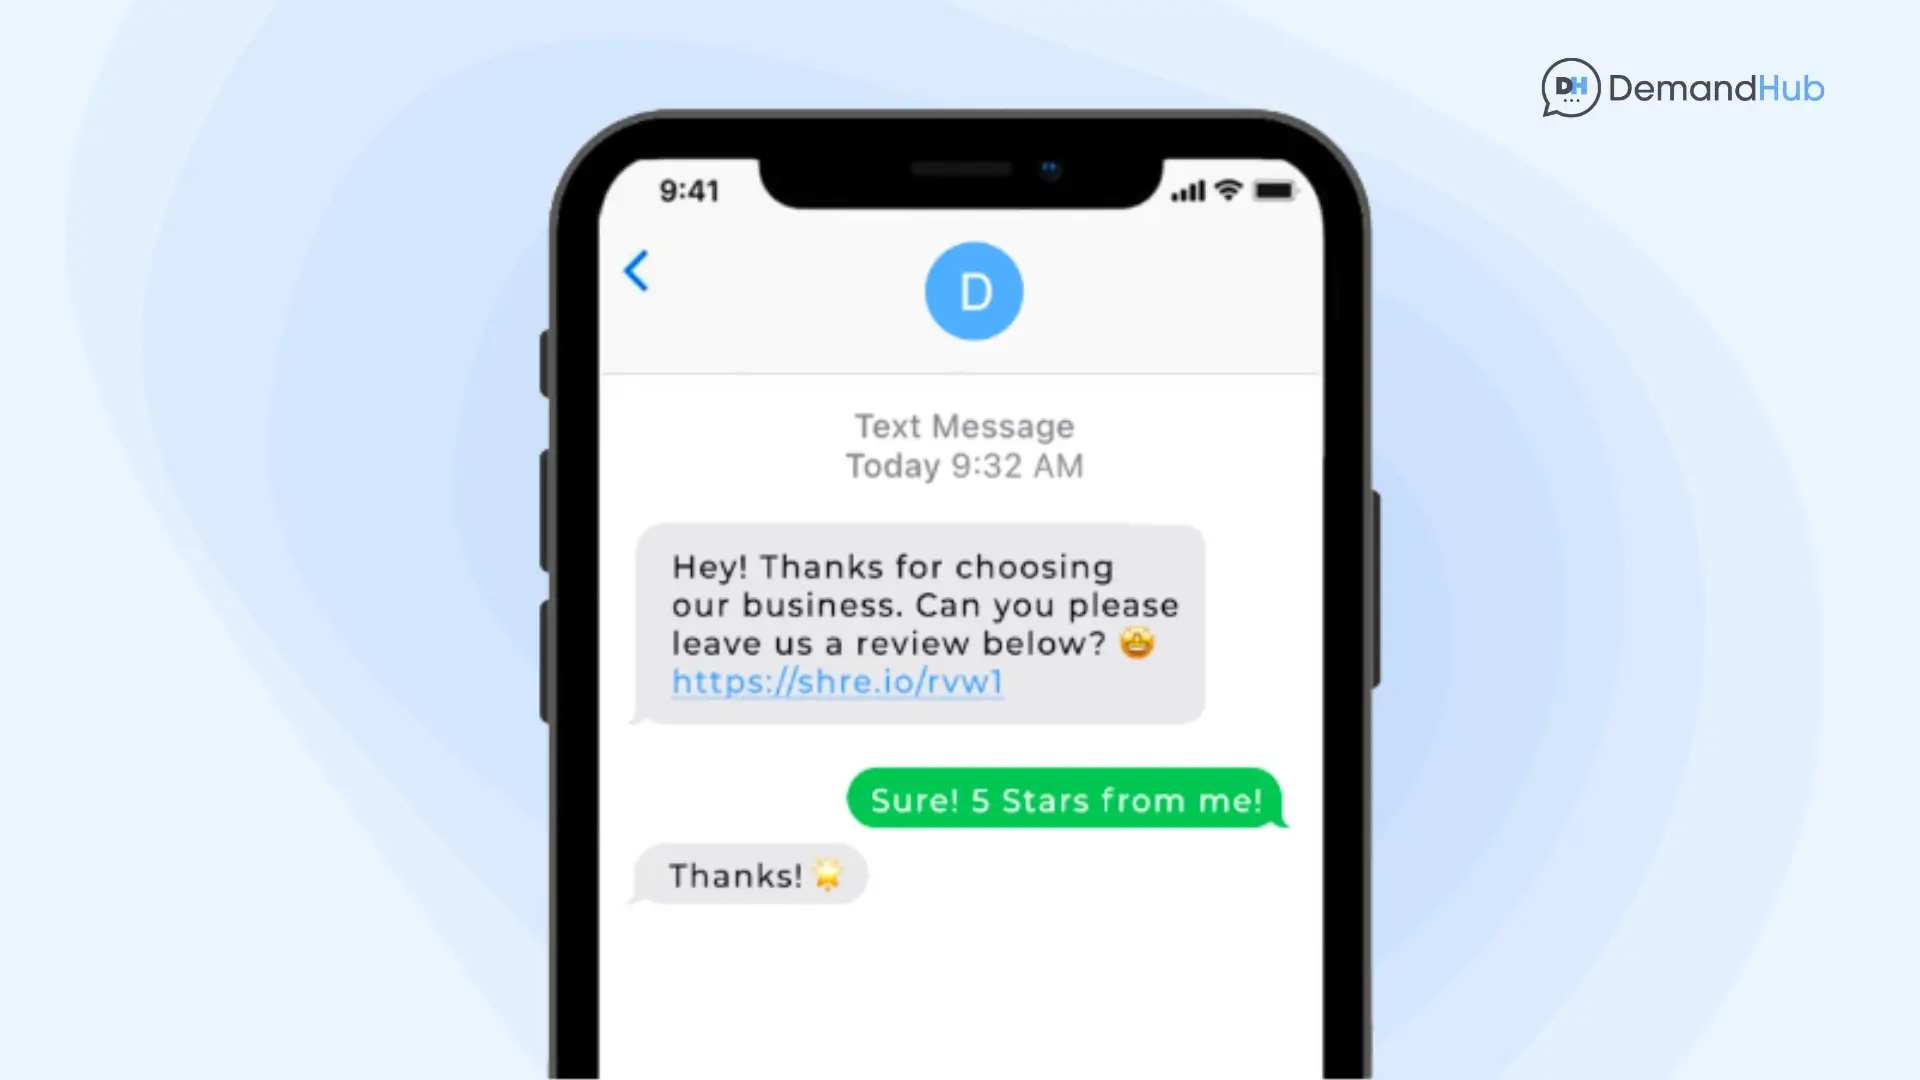 Request the customer to leave a Google Review through sms